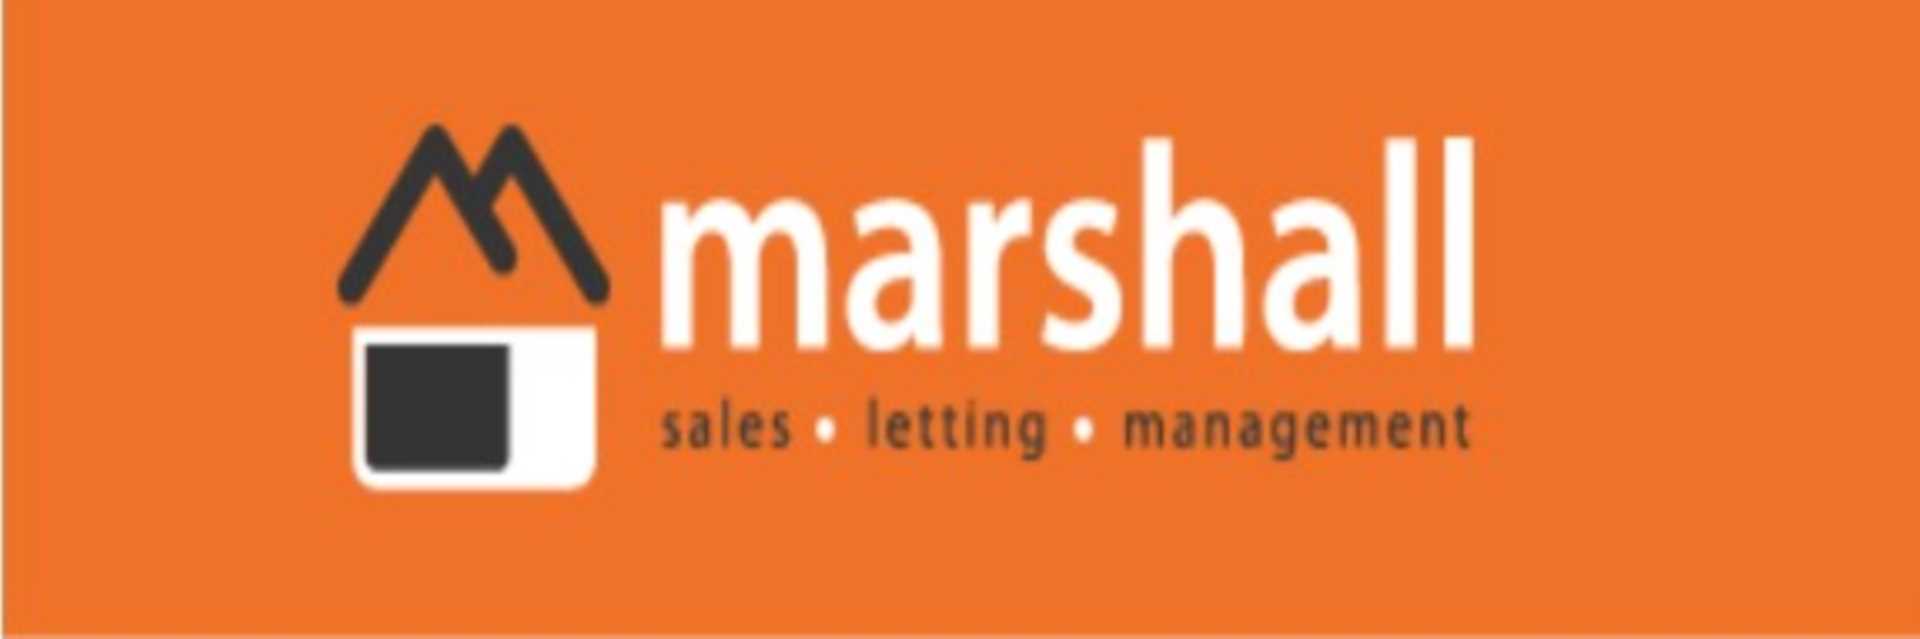 Turnkey: Marshalls Offer The Complete Package